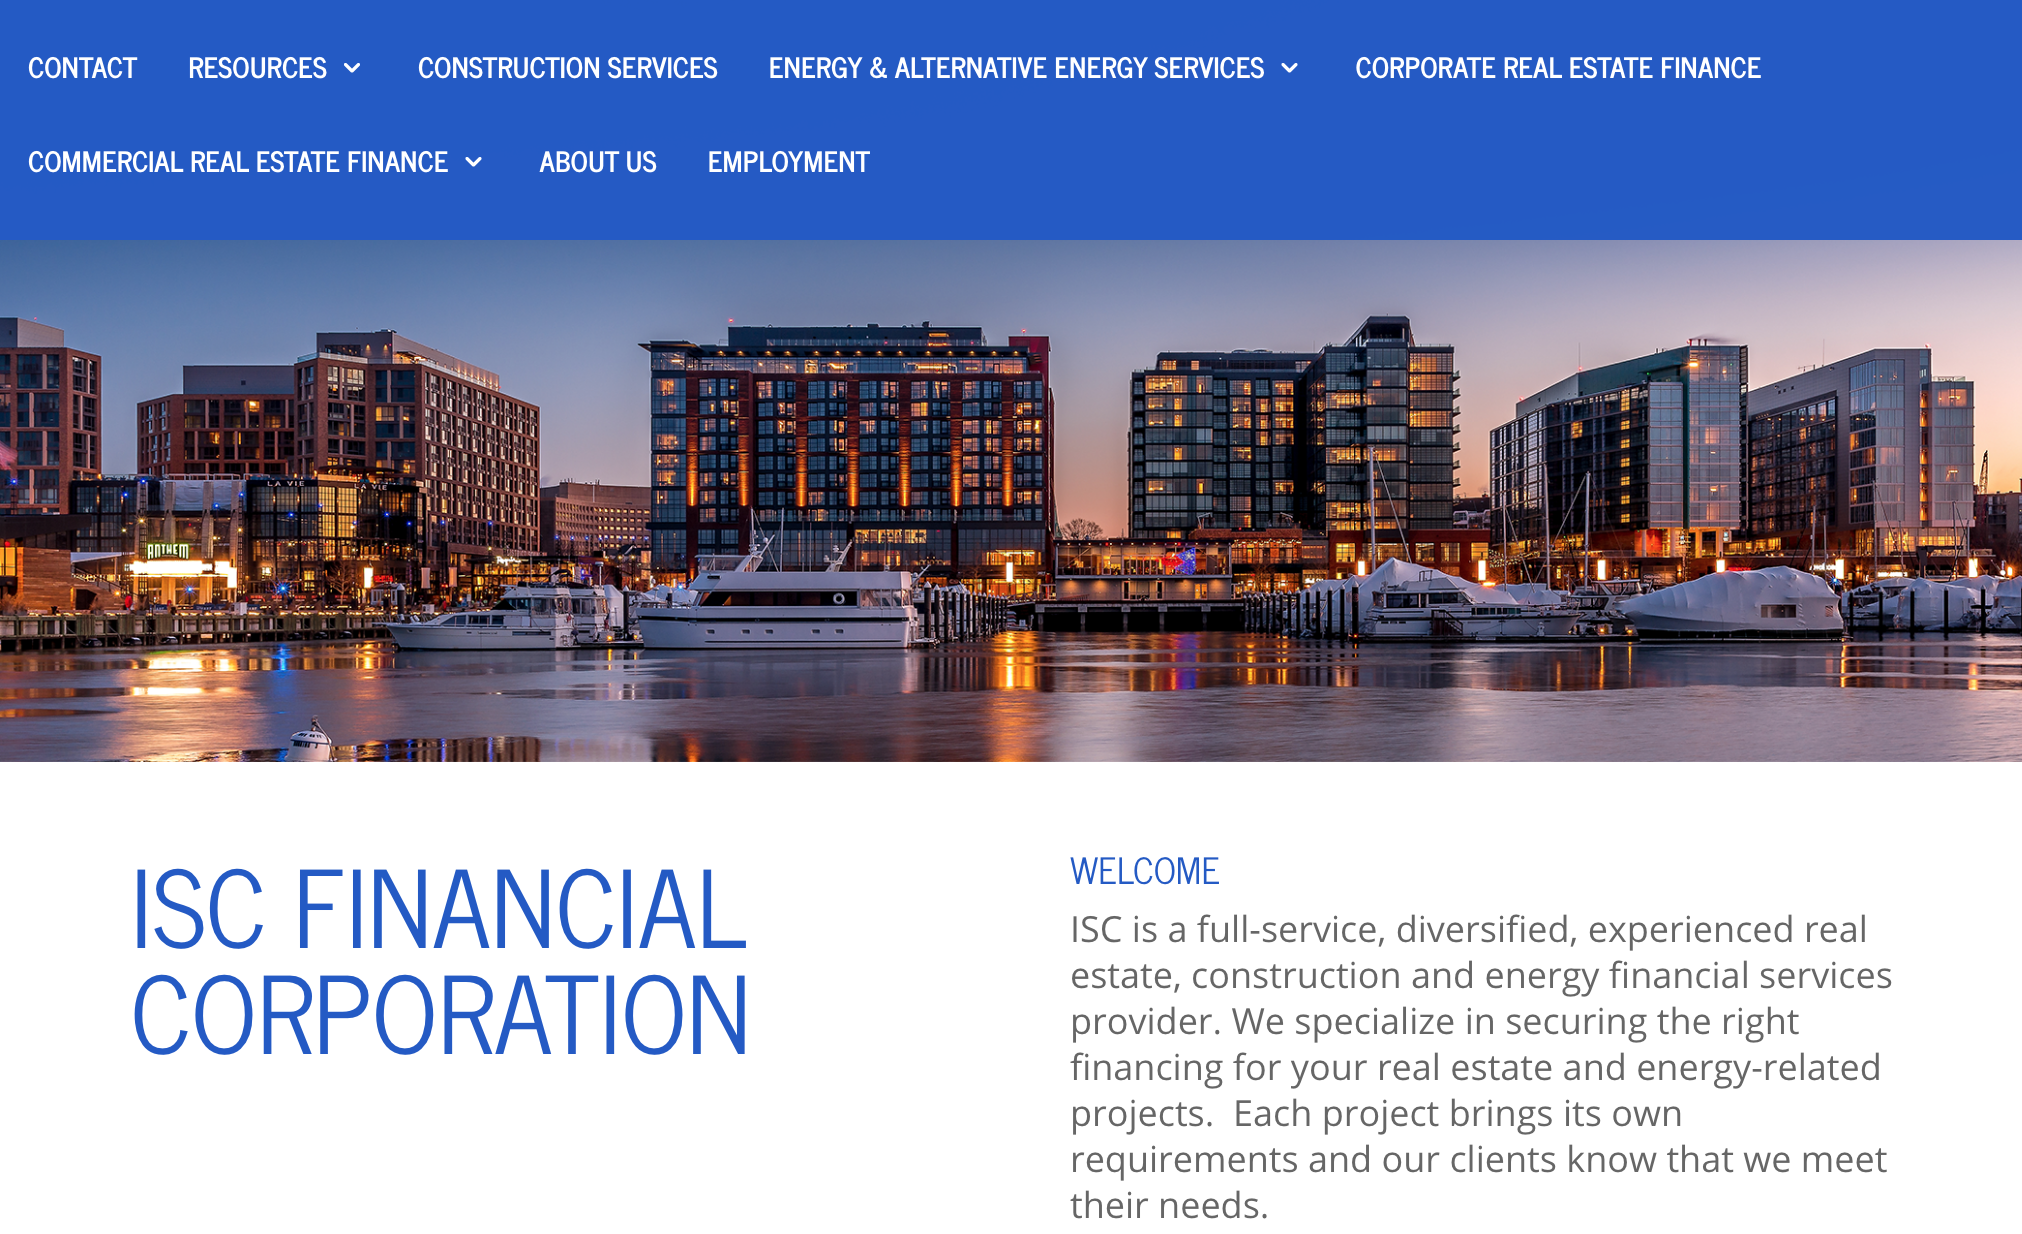 A screenshot of the ISC Financial website, published to: "Web Design, WordPress, SEO, Writing, and Graphic Design for ISC Financial, Inc."